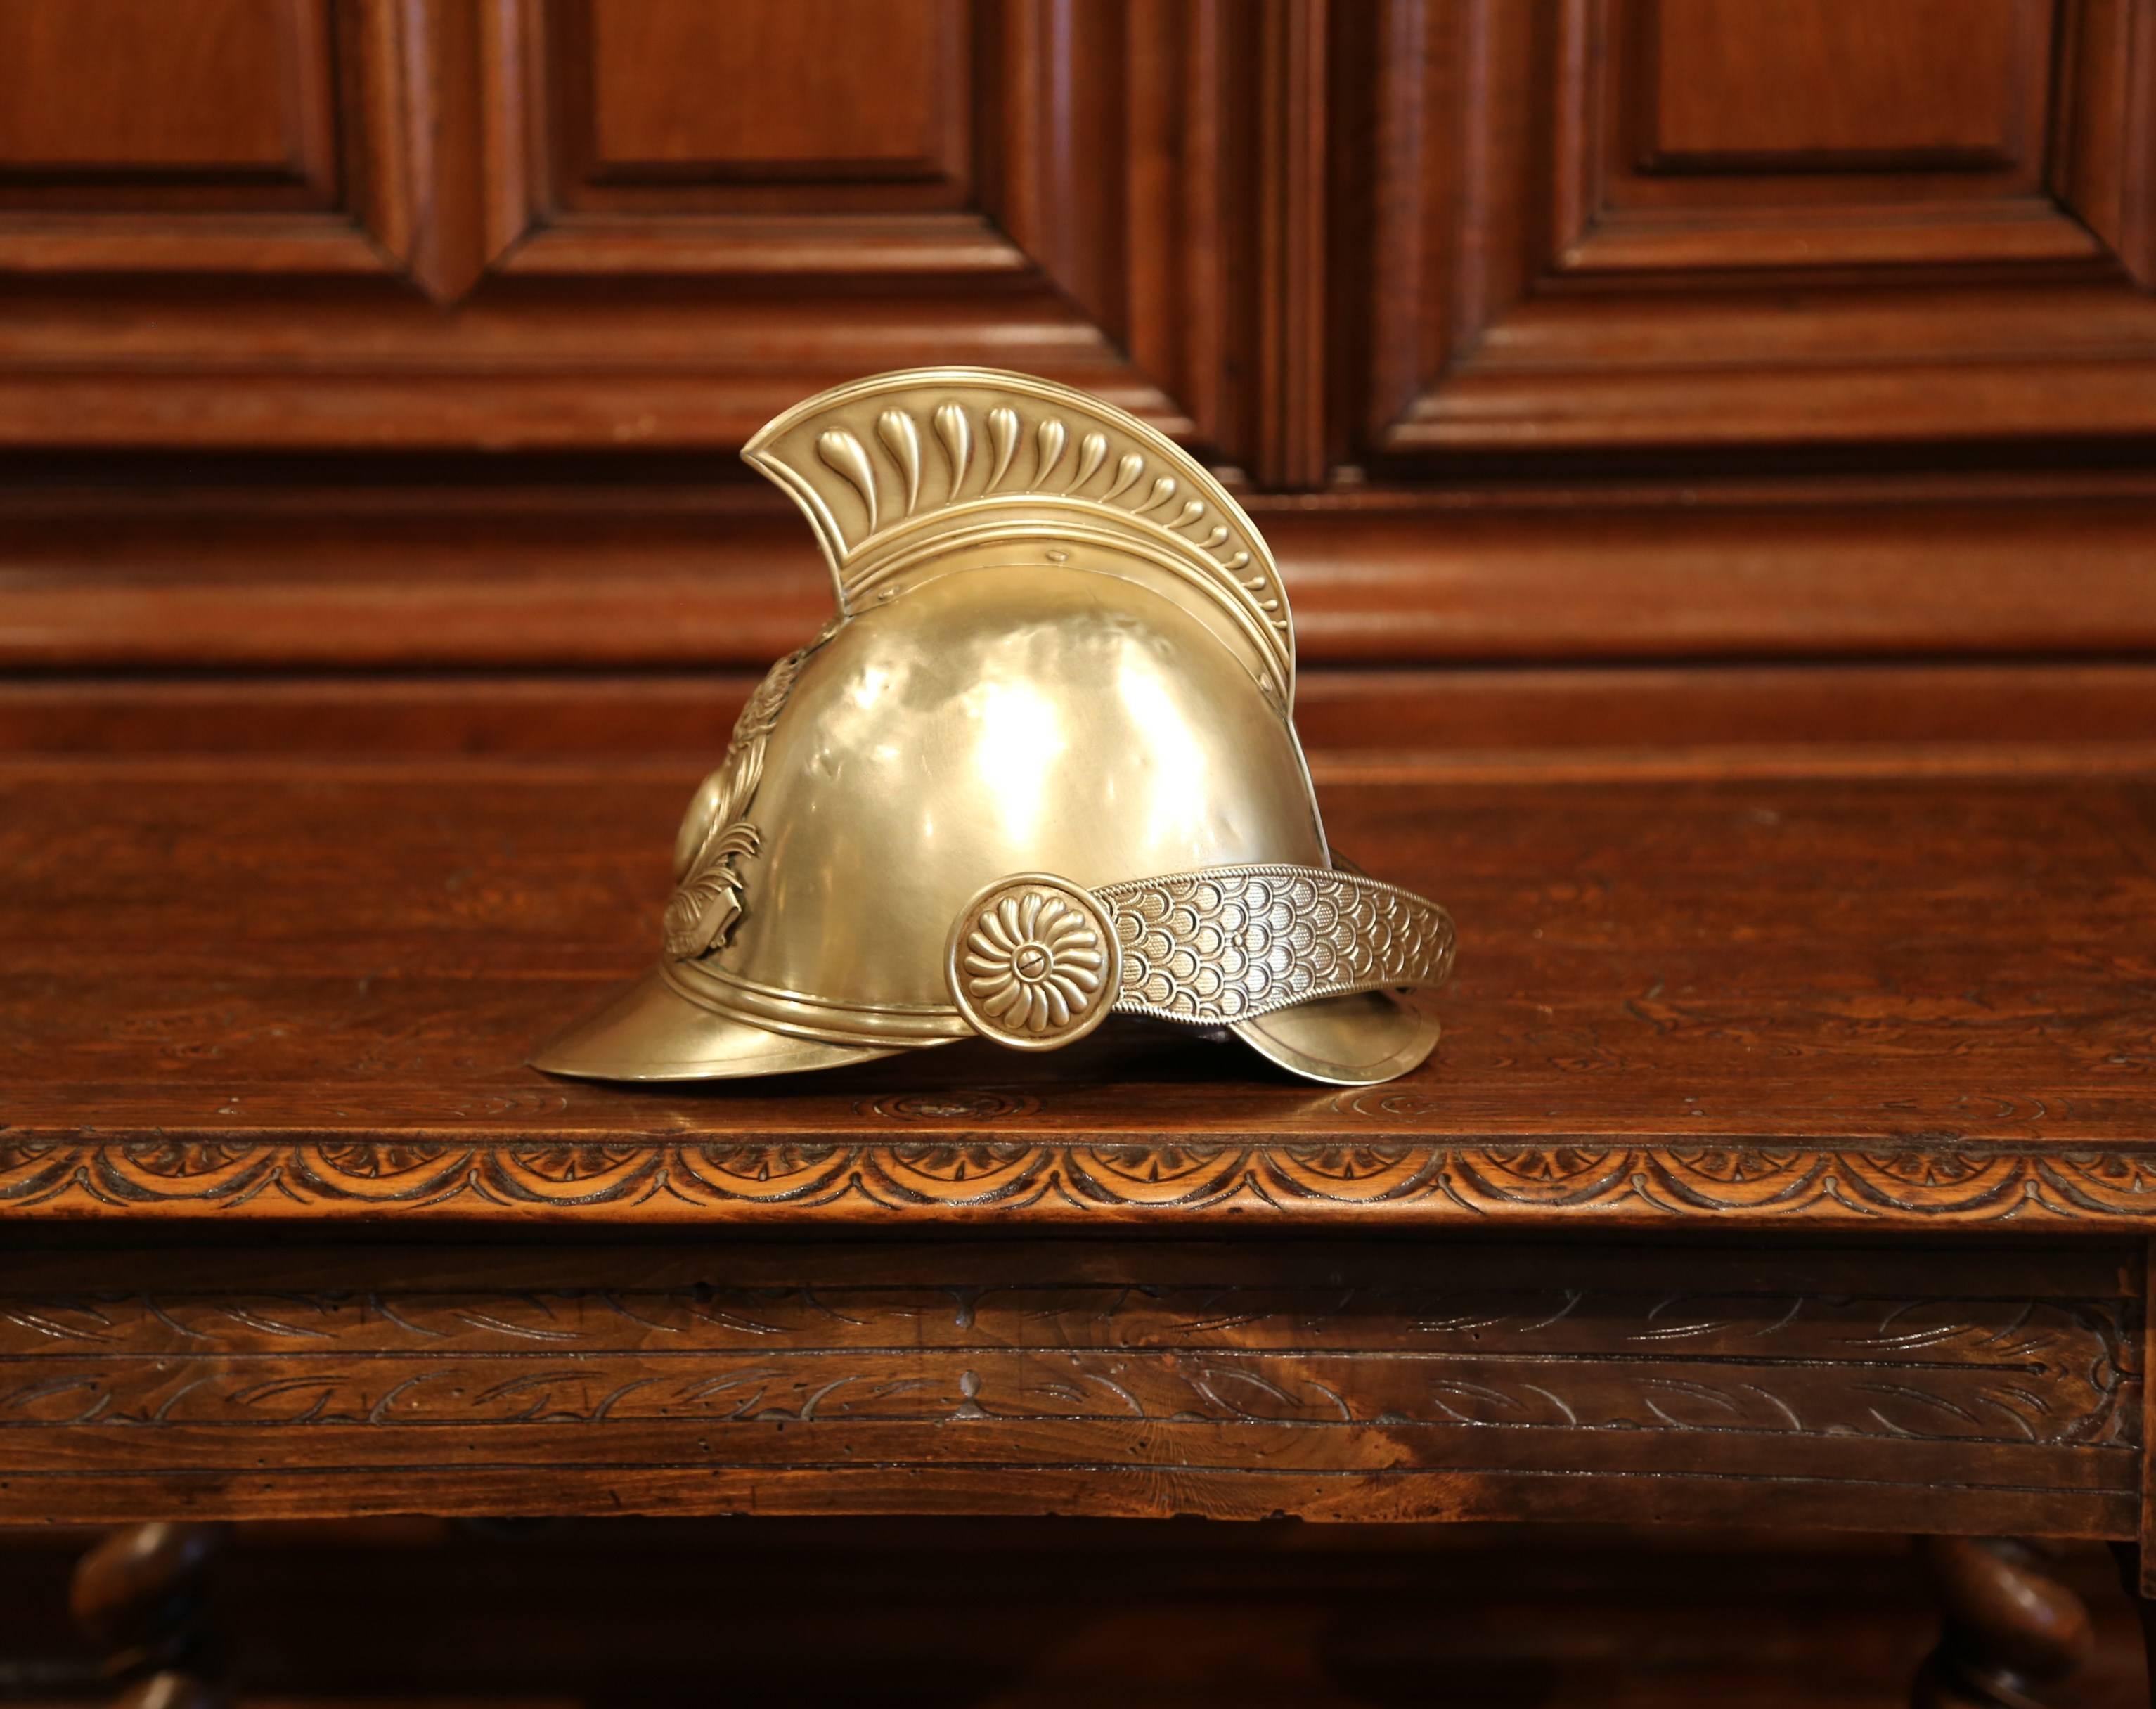 Beautiful antique fireman helmet from France; crafted circa 1930, the helmet features the original brass and leather straps and is signed on the front: 